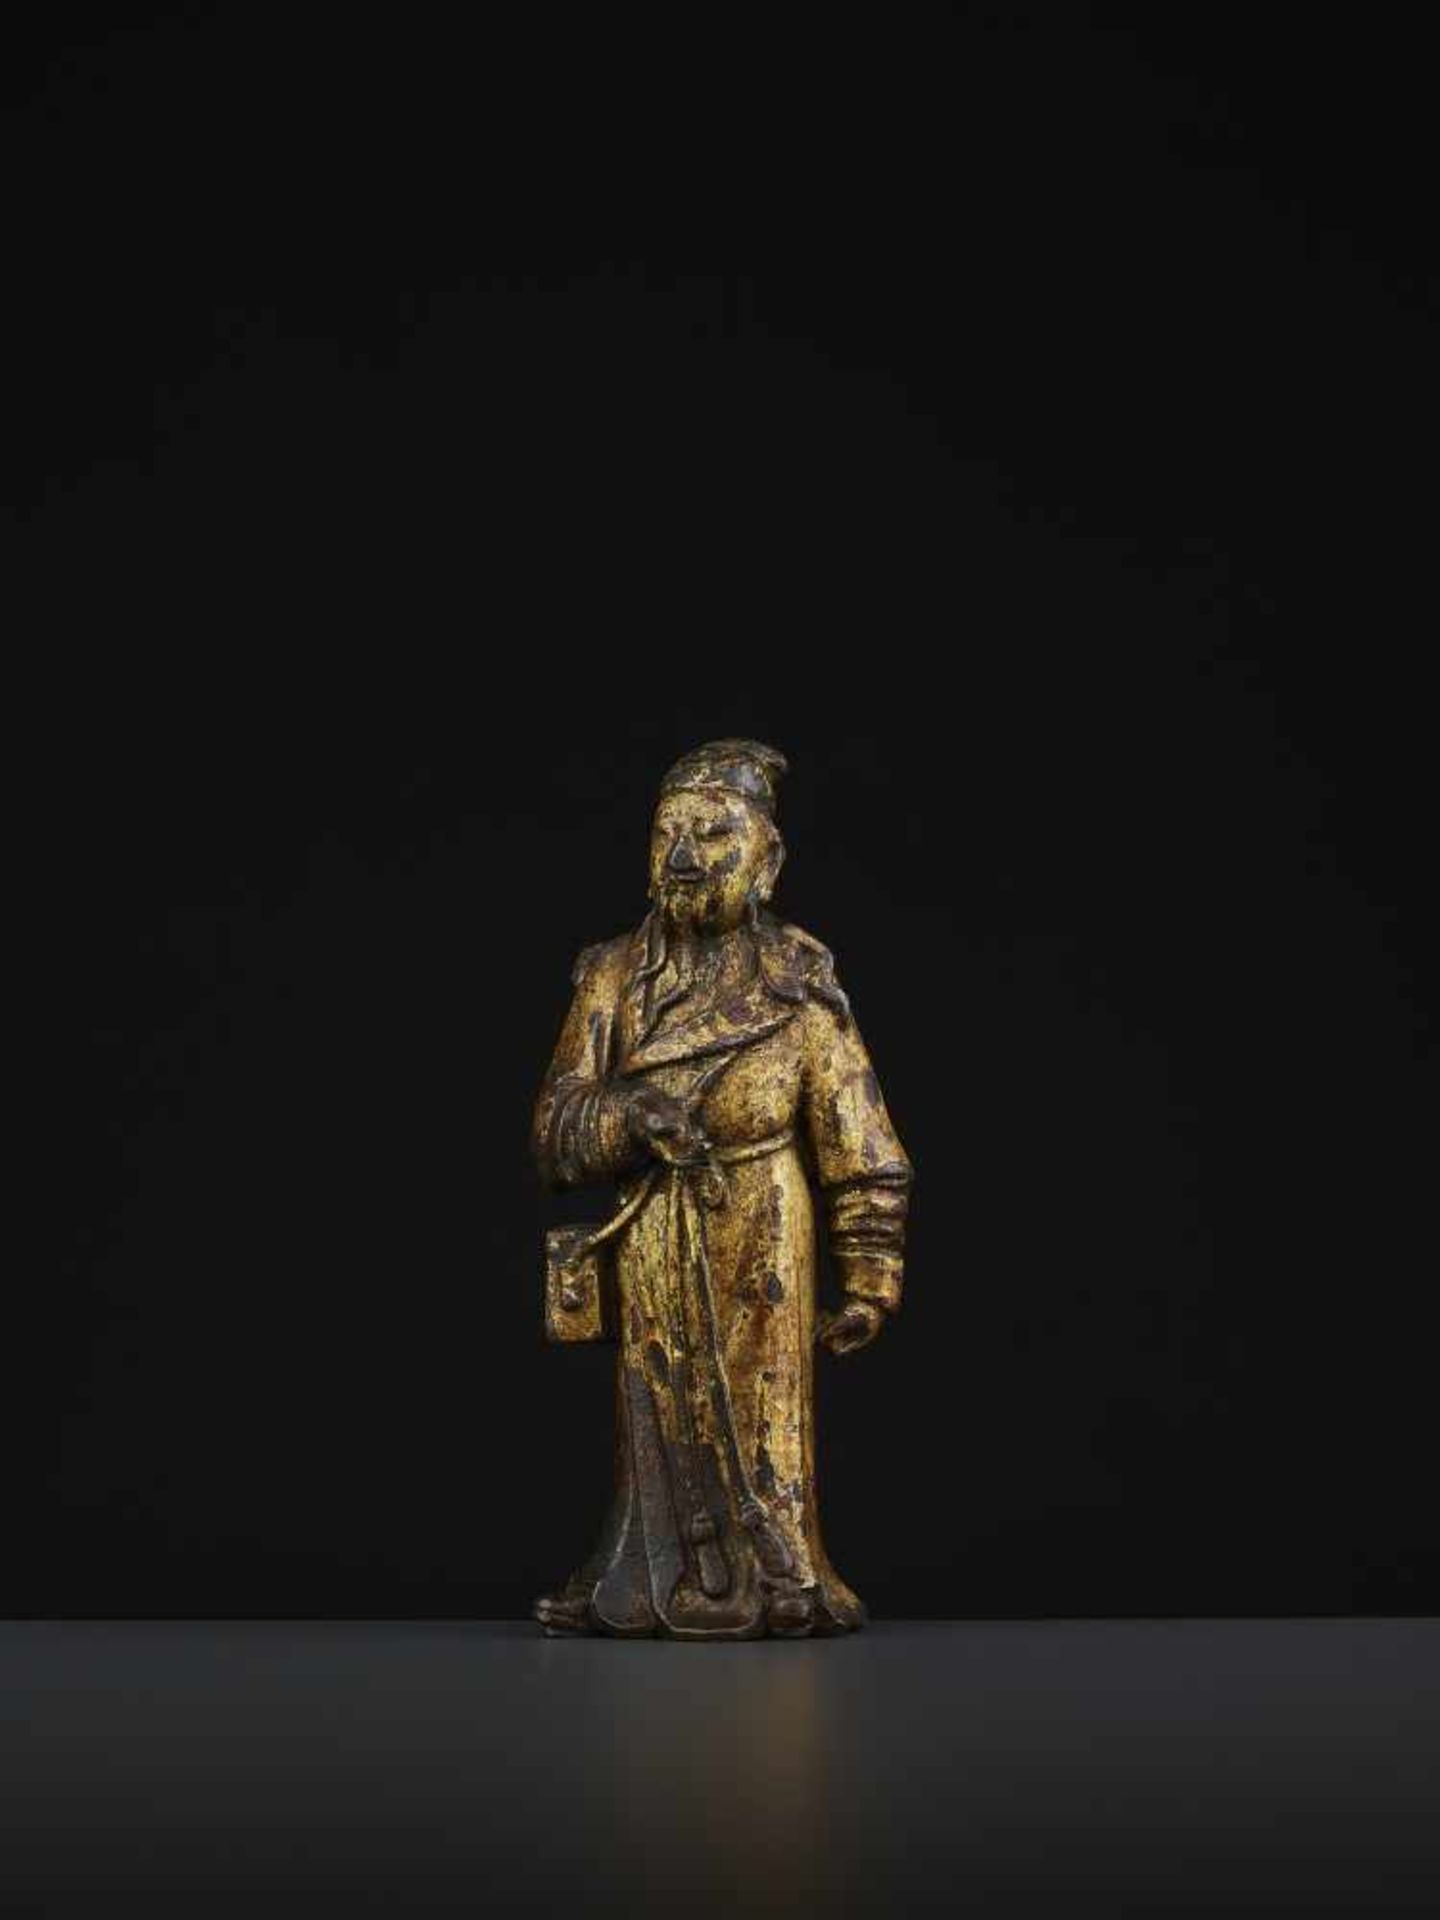 A MING DAOIST IMMORTAL BRONZEChina 16th - 17th century. The bronze with a rich gold lacquer coating. - Image 9 of 10